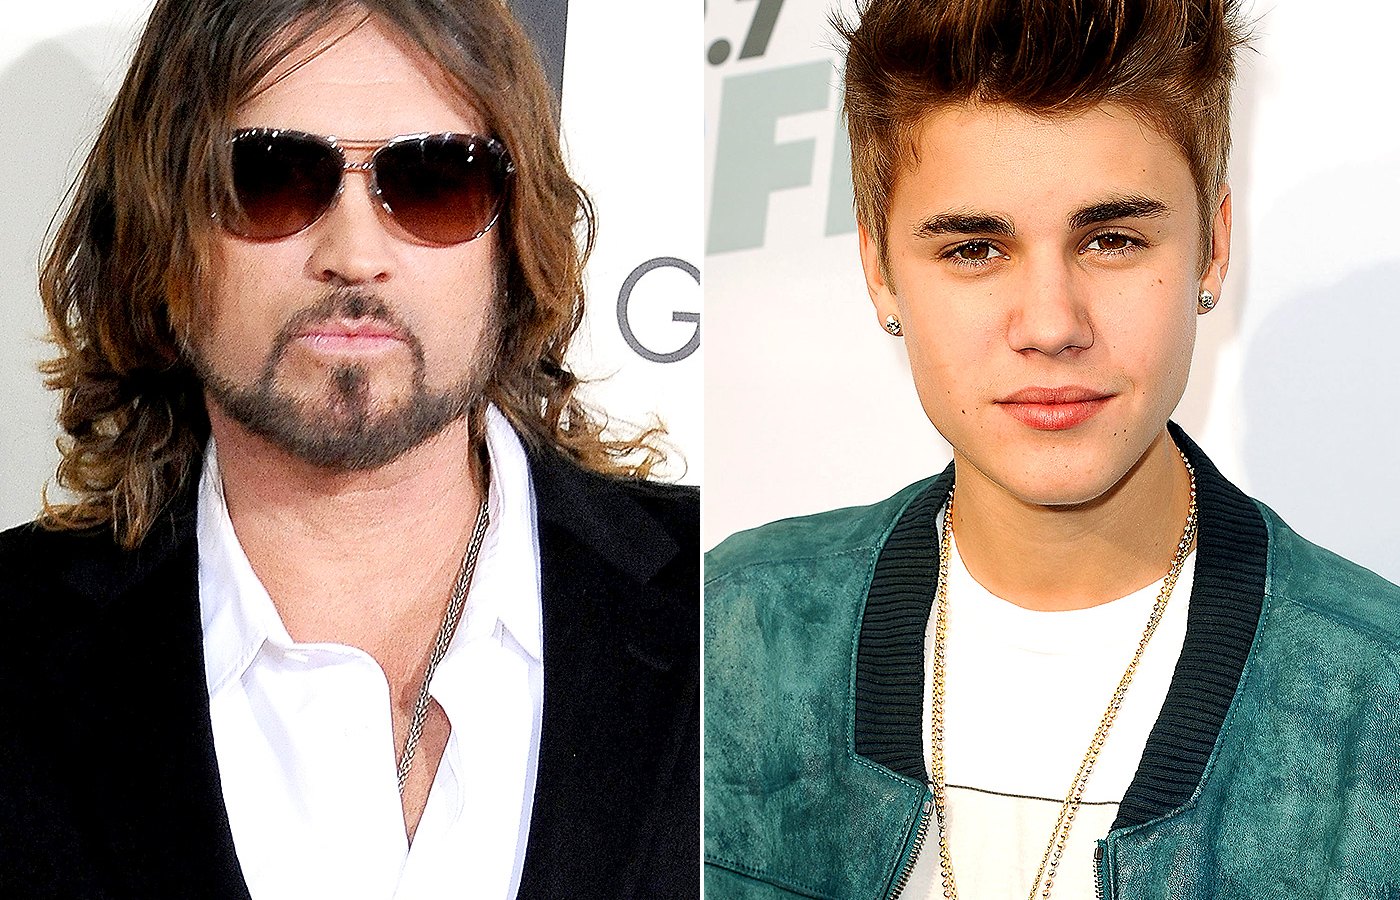 Billy Ray Cyrus and Justin Bieber